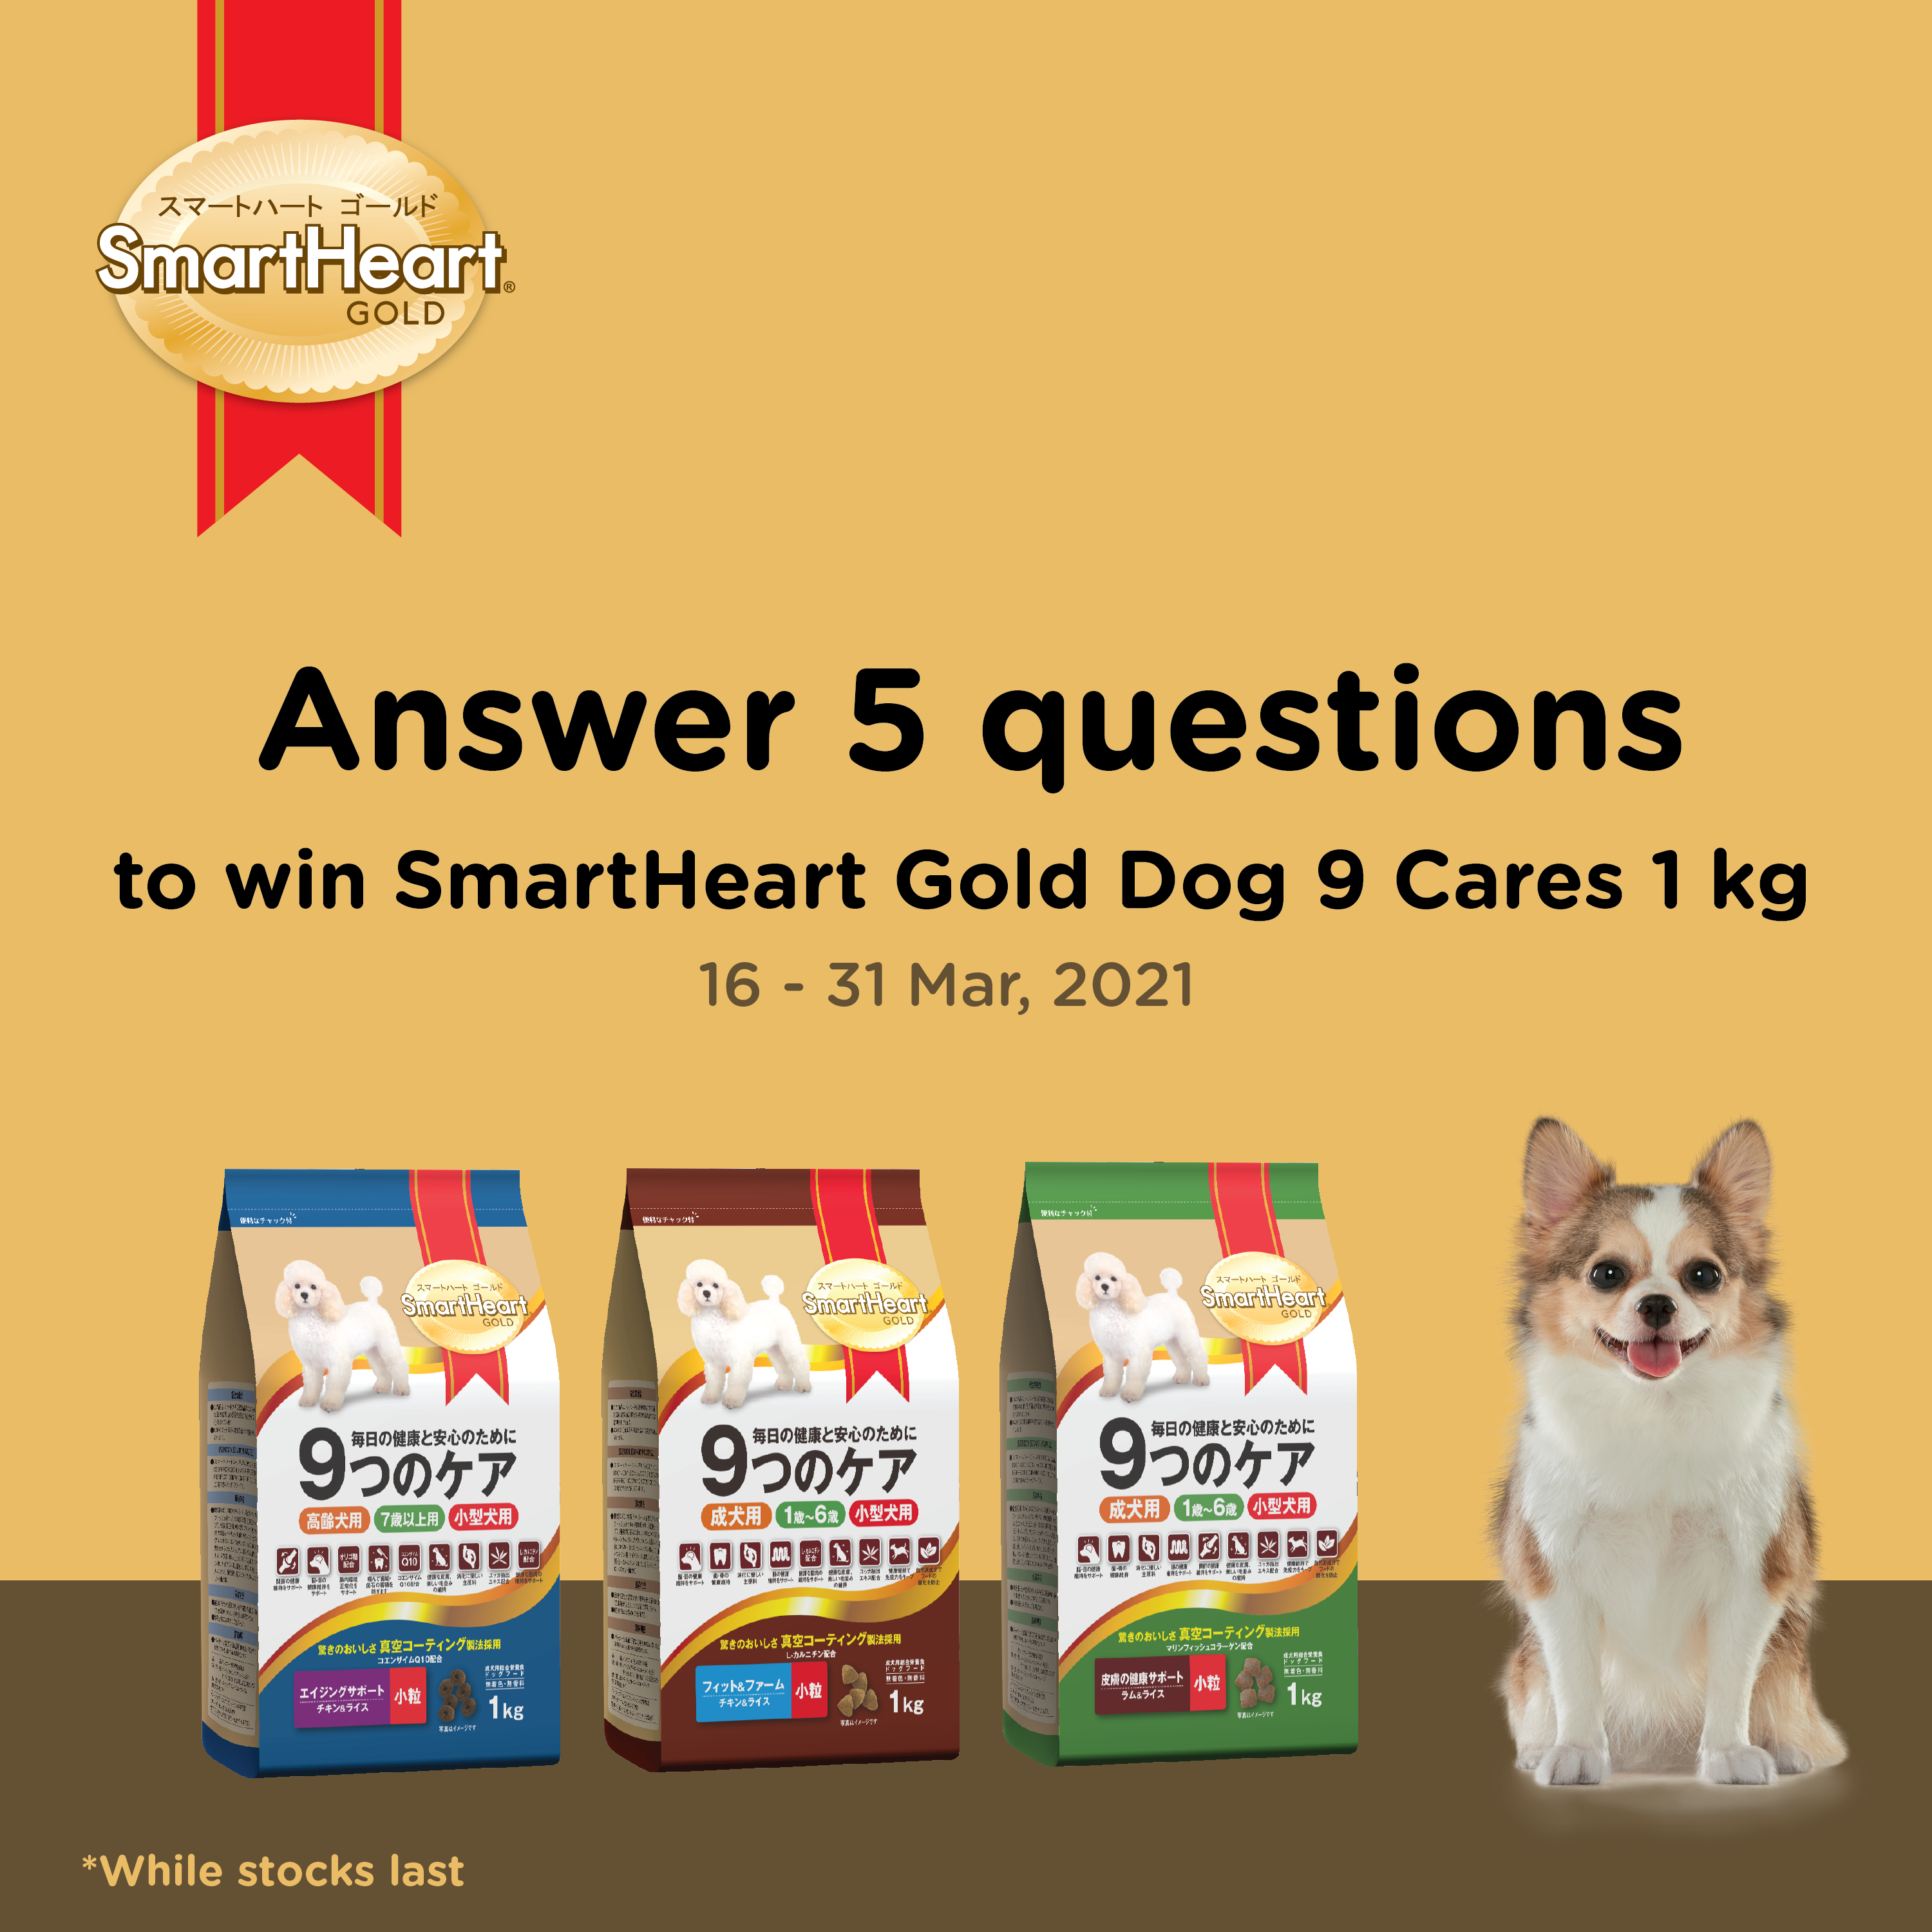 SmartHeart Gold Dog 9 Cares Challenges